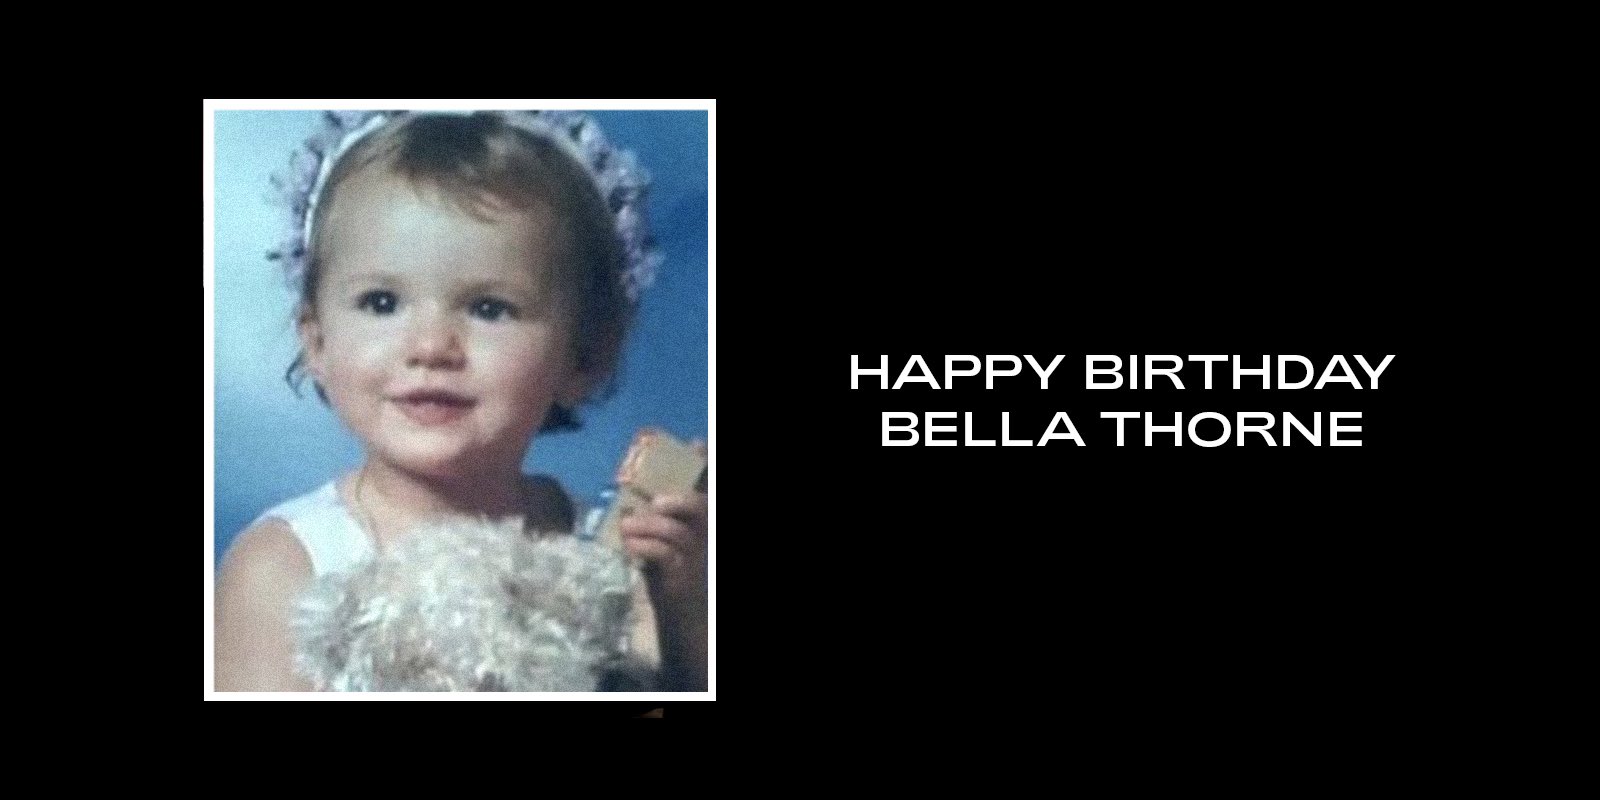 Beyoncé wished Bella Thorne a happy birthday on her website. 